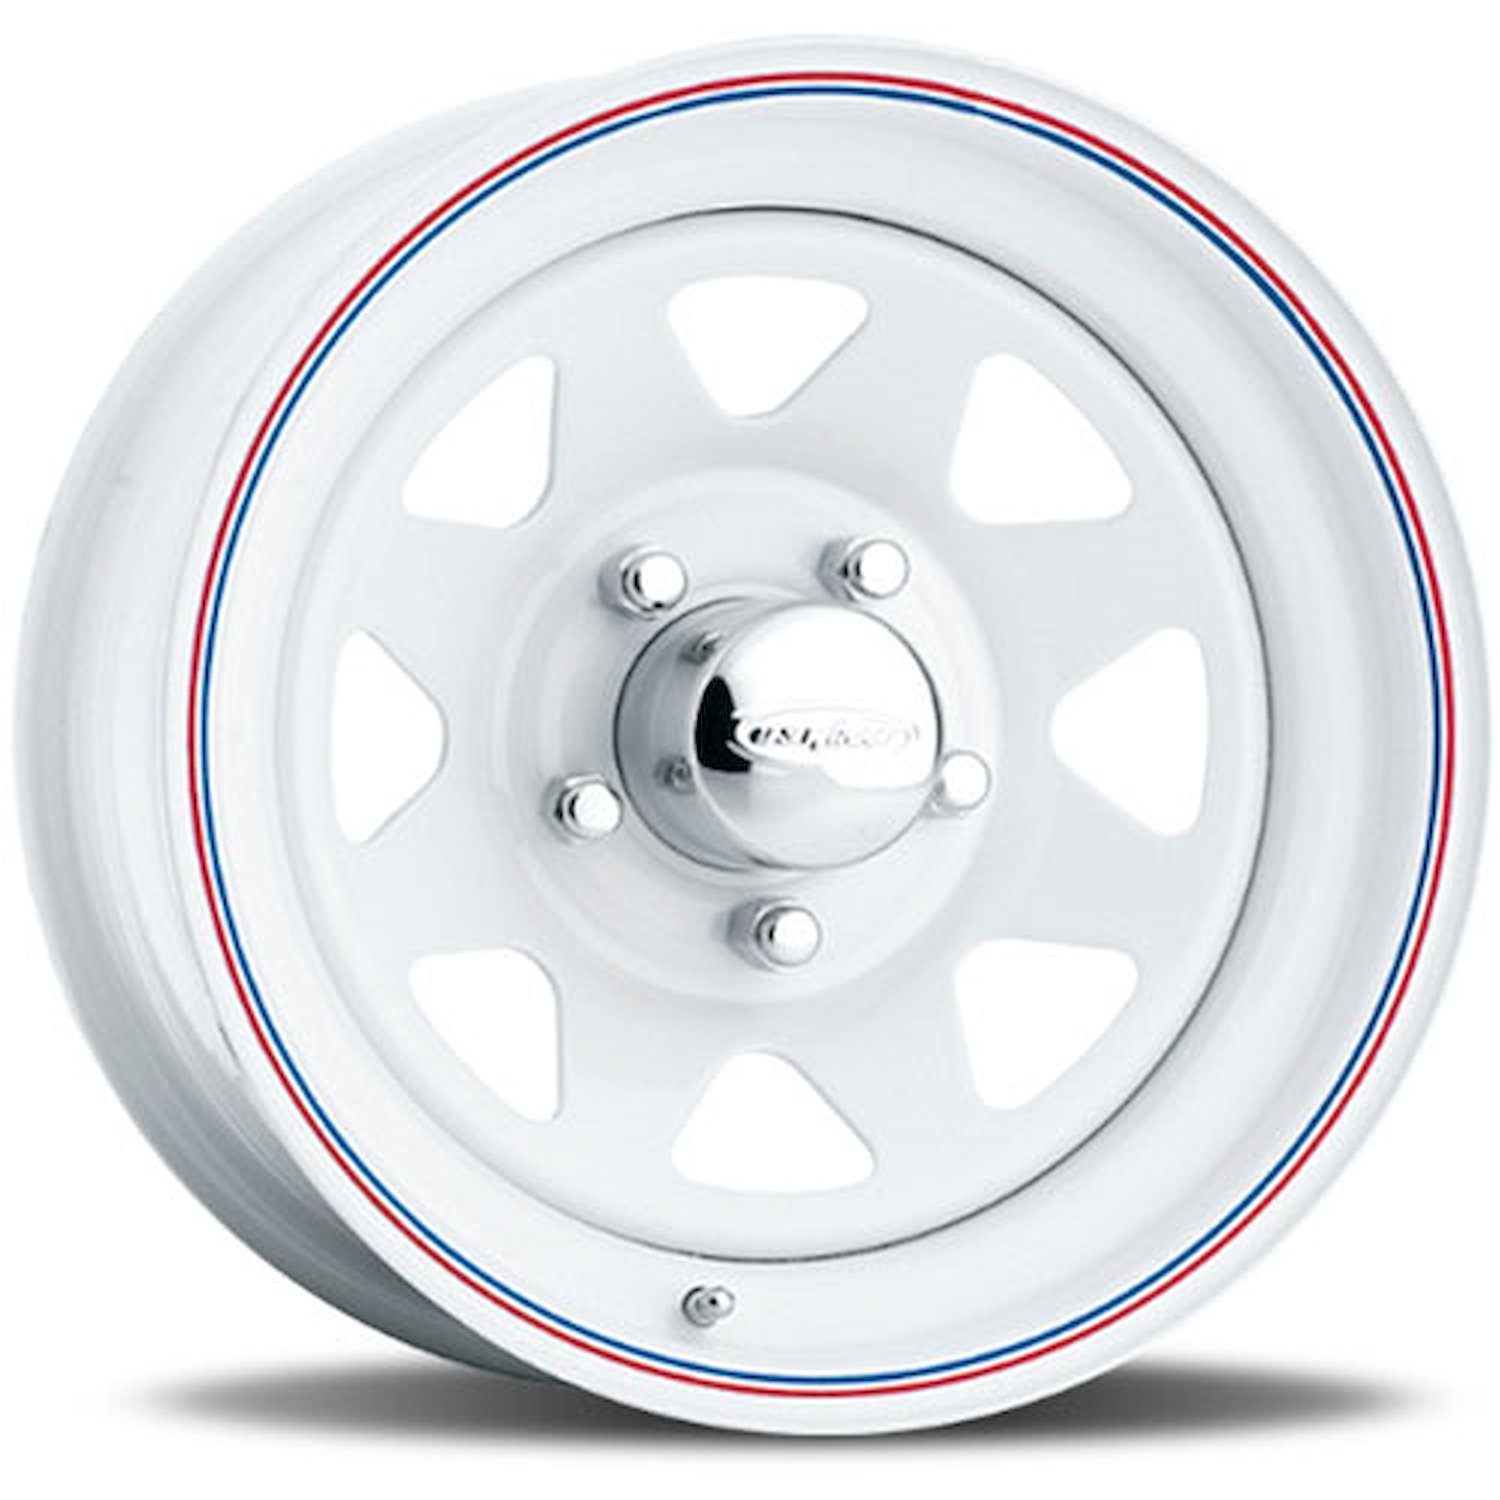 WHITE 8SPOKE 16 x 7 6 x 55 Bolt Circle 4 Back Spacing 0 offset 428 Center Bore 2000 lbs Load Rating